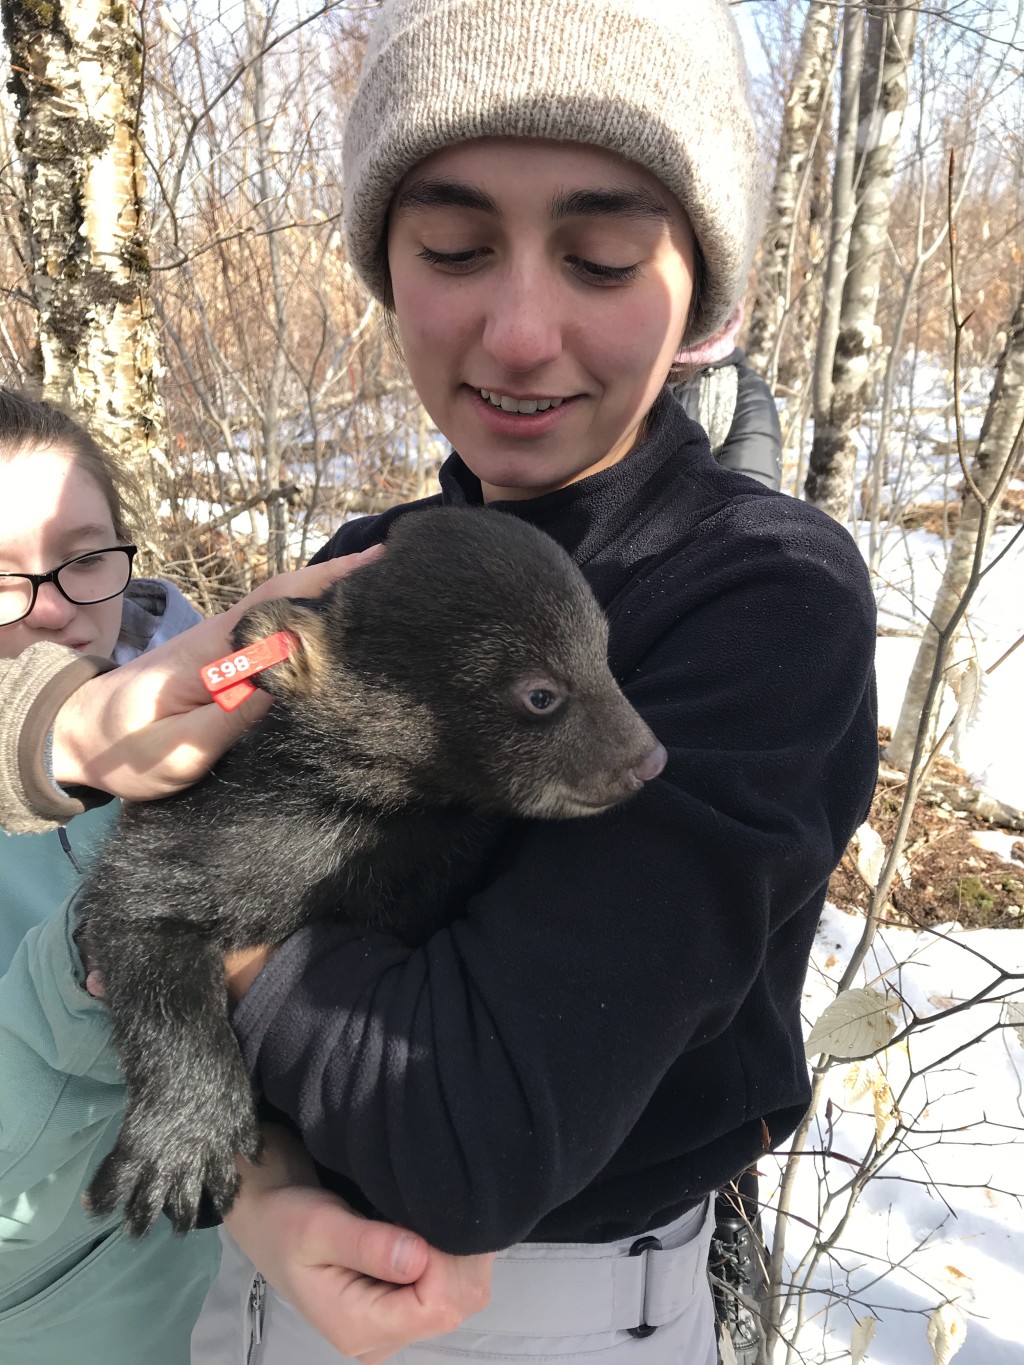 Olivia Scott says students agreed that the cub smelled like the earth